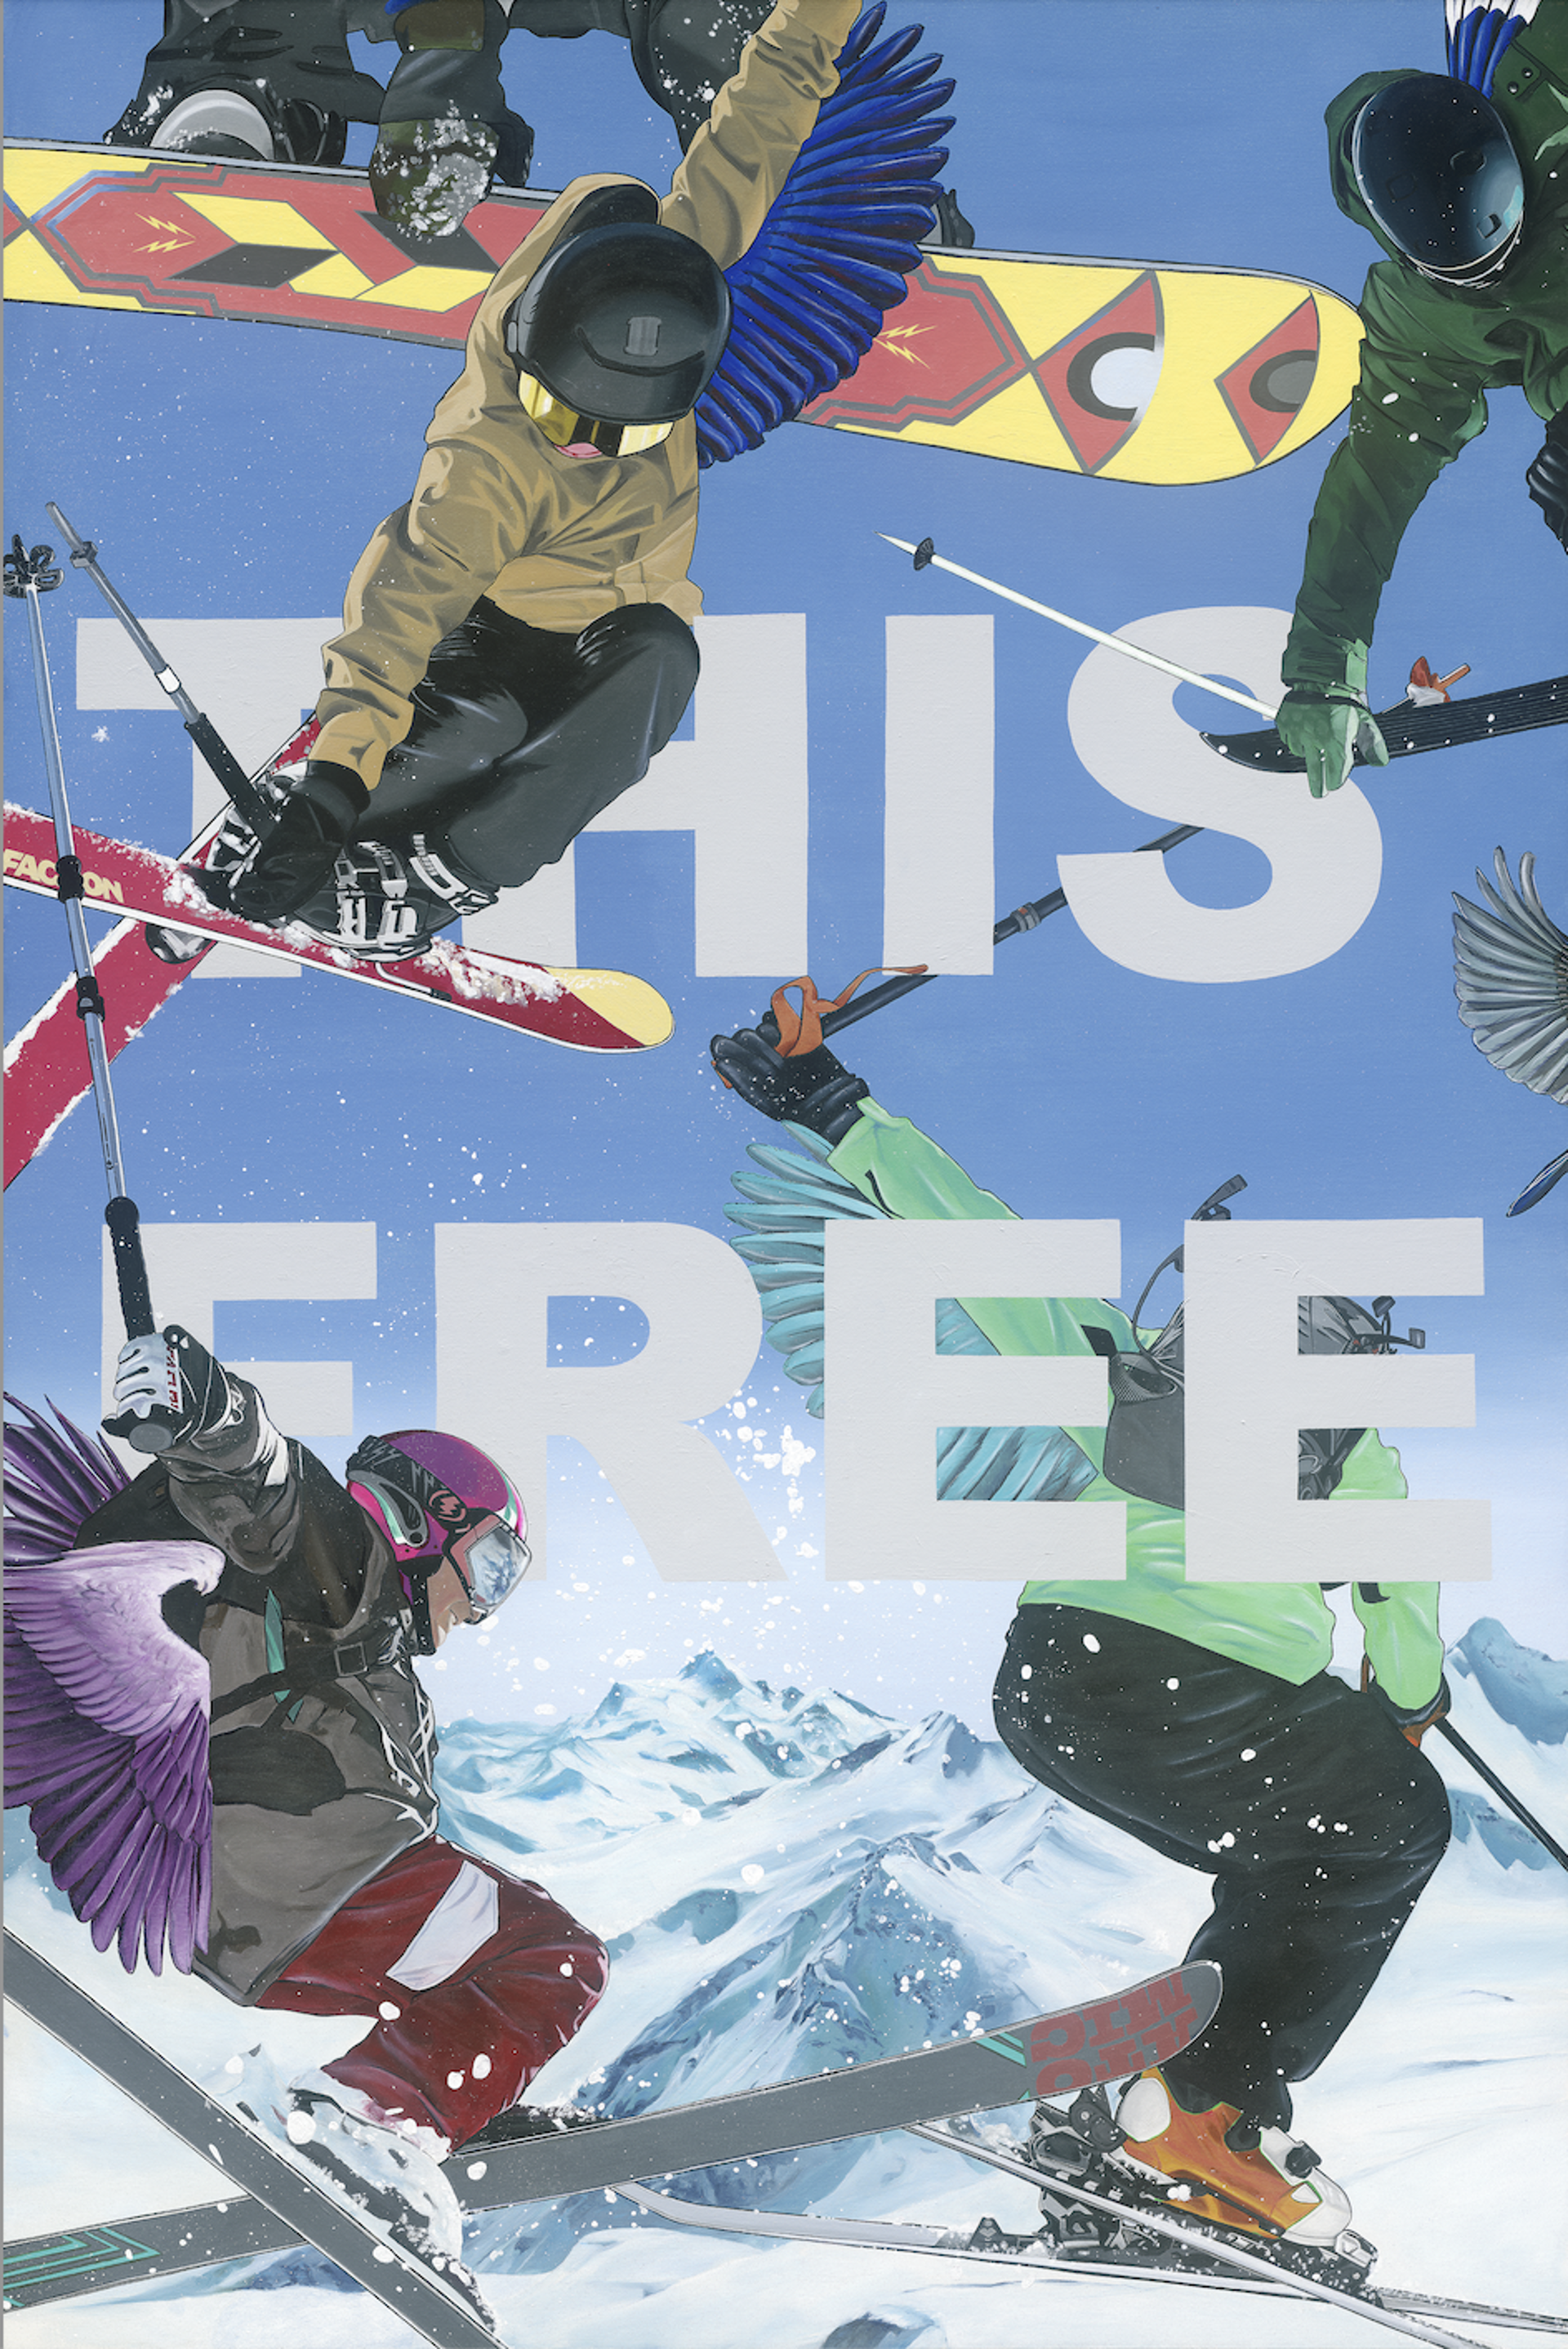 Birds Don't Feel This Free by Sam Shuter